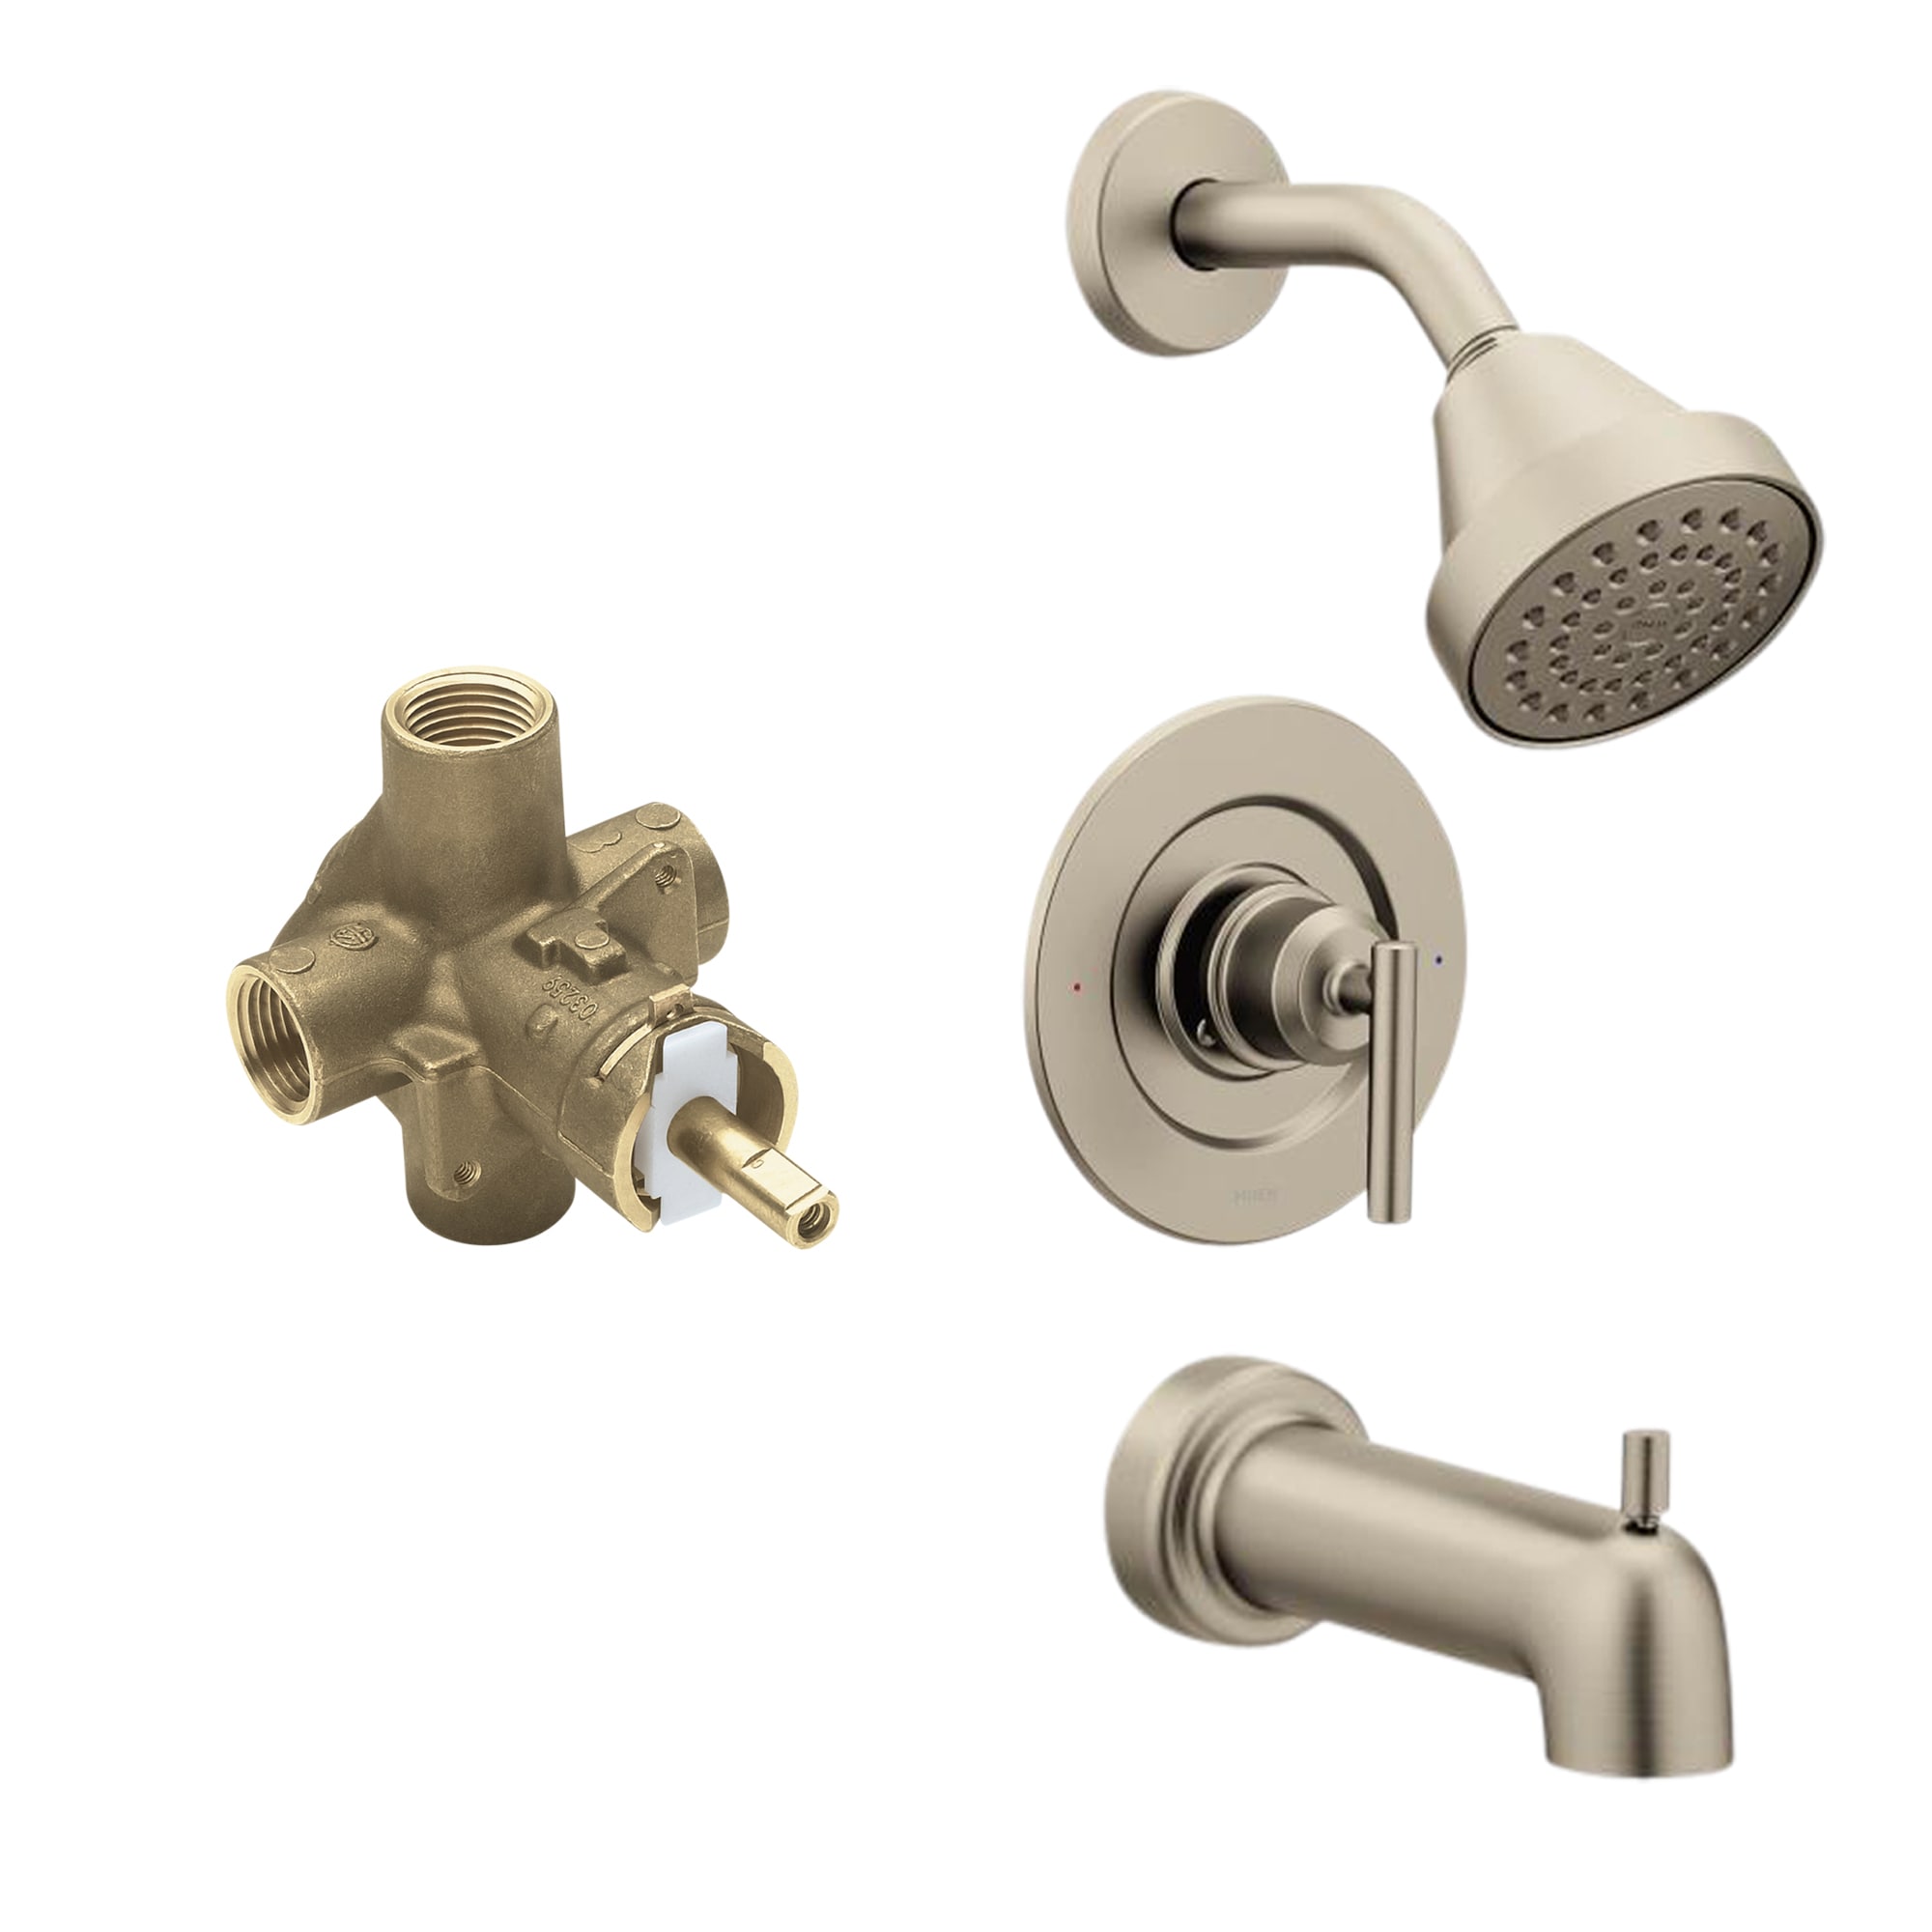 Moen Gibson Brushed Nickel 1-Handle Bathtub and Shower Faucet with Valve